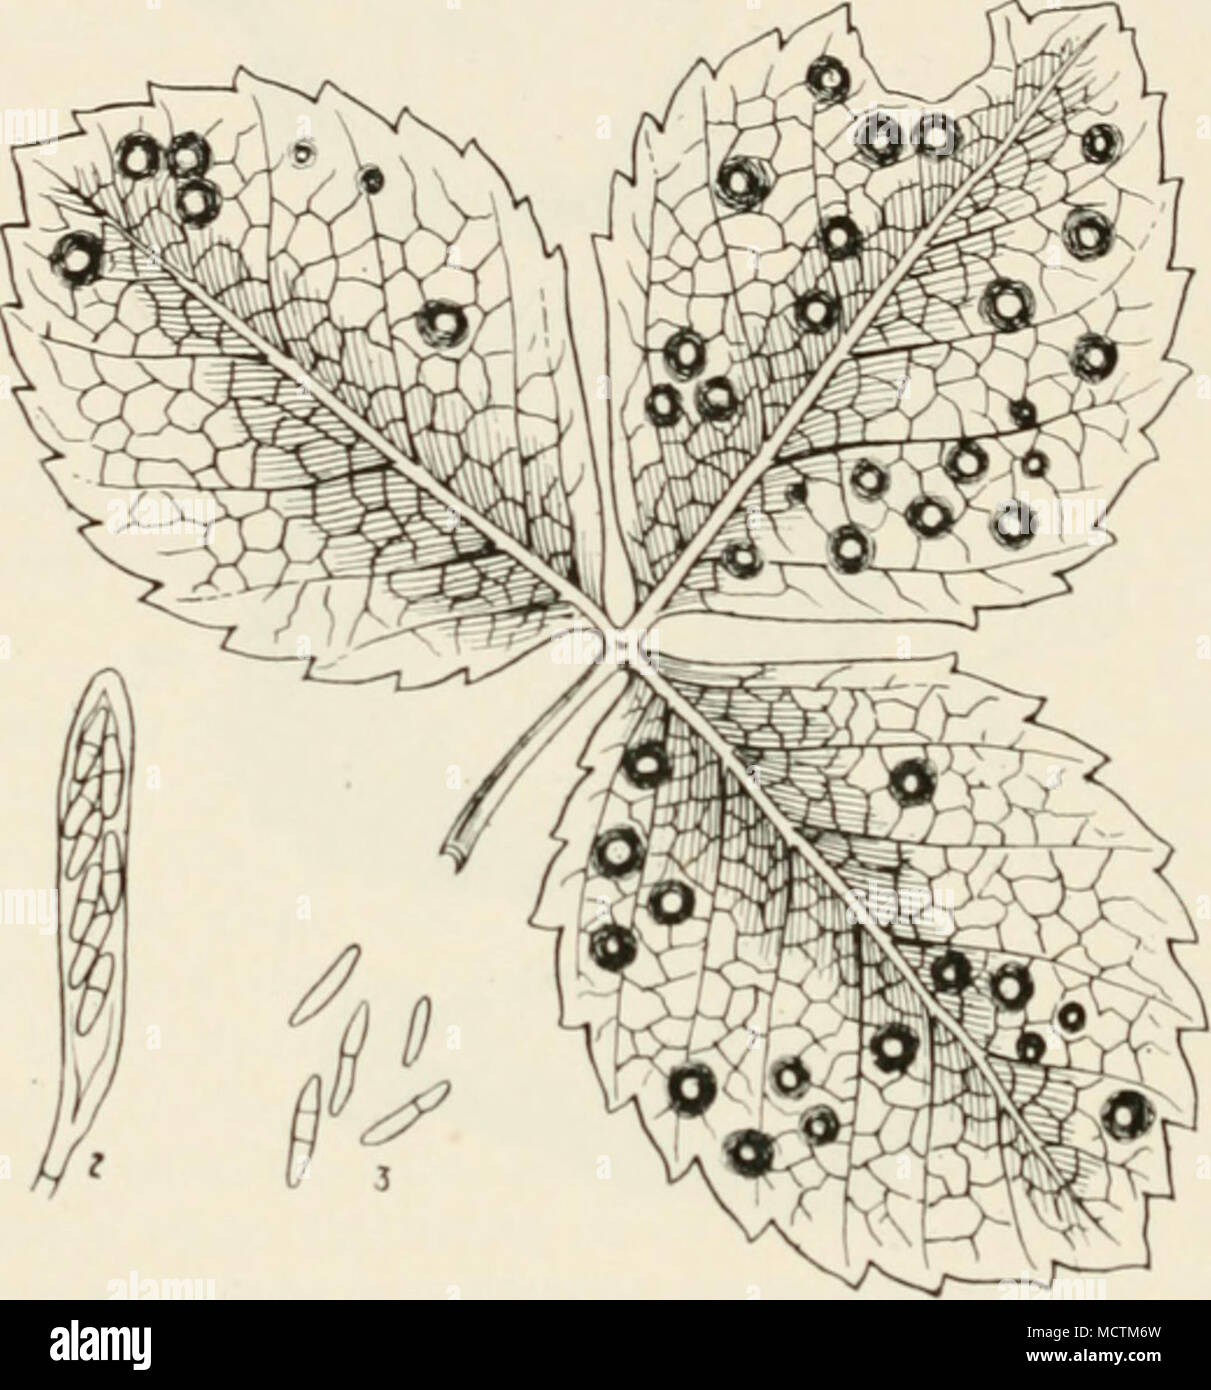 . Fig. 52.—Sphaerella fra^^ariae. i, a diseased straw- berry leaf; 2, ascus containing eight spores of the Sphaerella or ascigerous stage; 3, conidia of the Ratnularia or conidial stage. 1-igs. 2 and 3 liighly mag. irregular patches. By degrees the centre of the patch assumes an ashy-grey or almost white colour, and is bounded by a reddish border, which is often ([uitc bright in colour later in the season. The central portion then becoaies studded with very minute white tufts of the conidial form of fruit. Later in the season these minute white tufts are replaced by minute black points—the asc Stock Photo